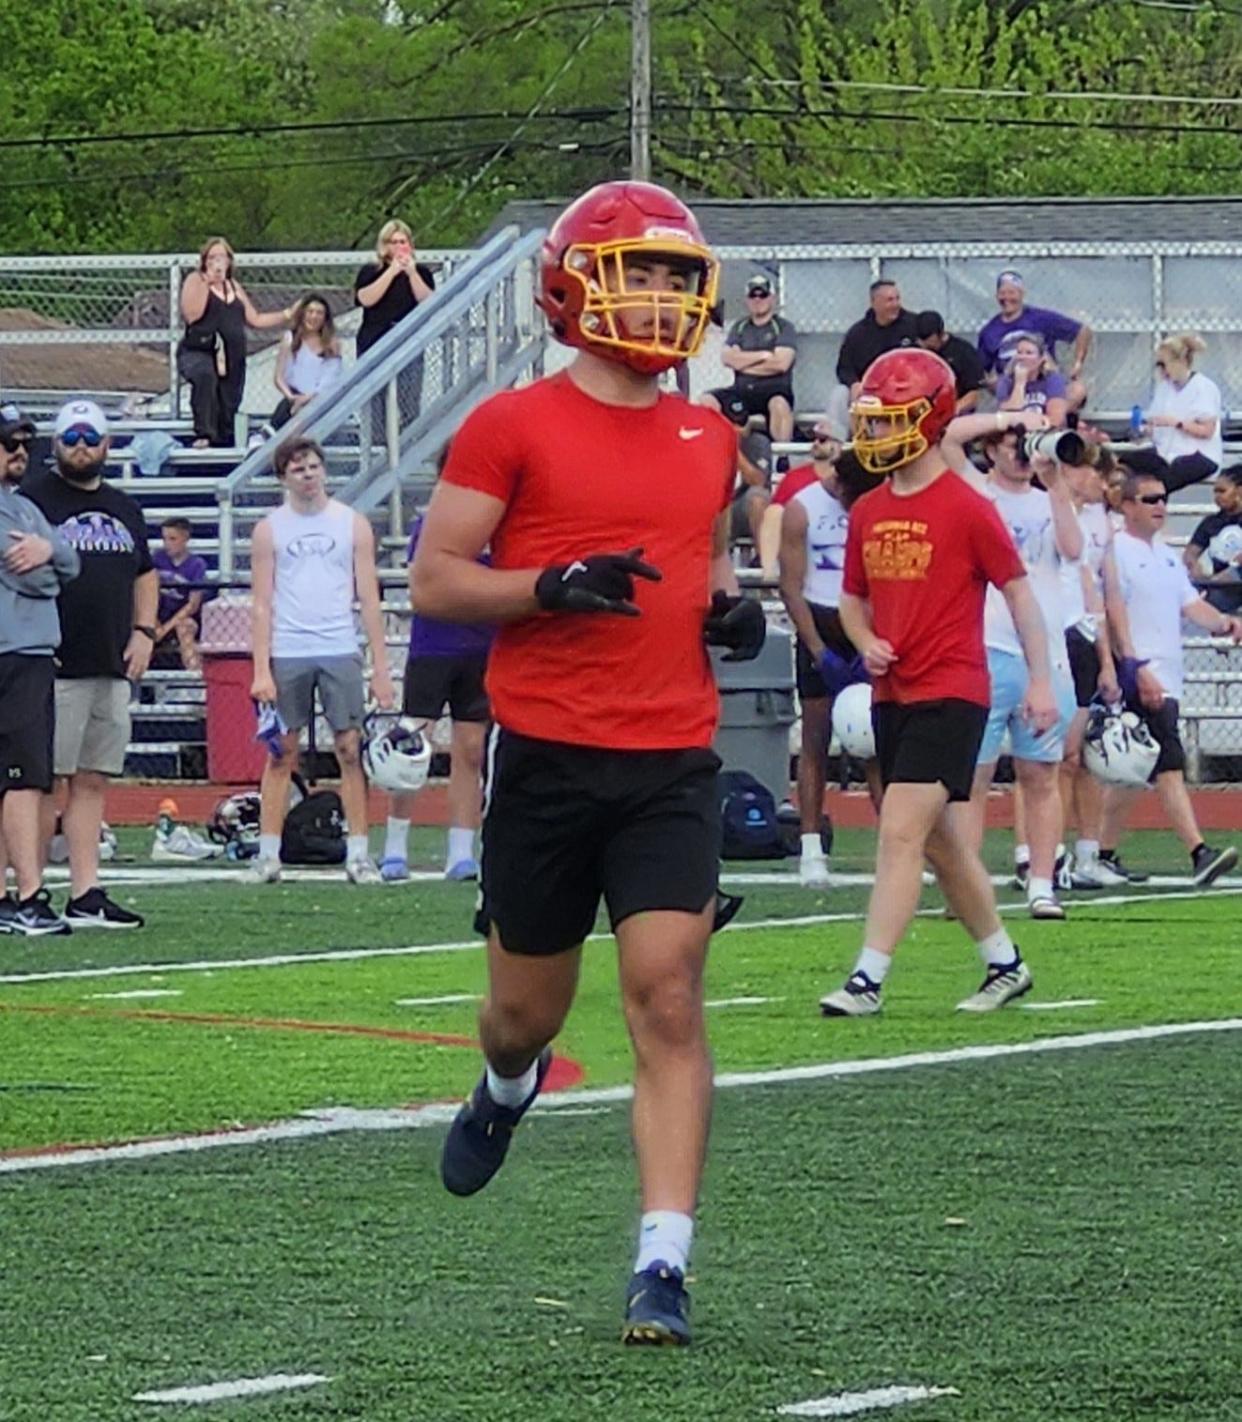 Big Walnut wide receiver Brody Hatfield runs to the slot before a play during a 7-on-7 Sunday at Hartley. Hatfield is one of several returning starters for the Golden Eagles.